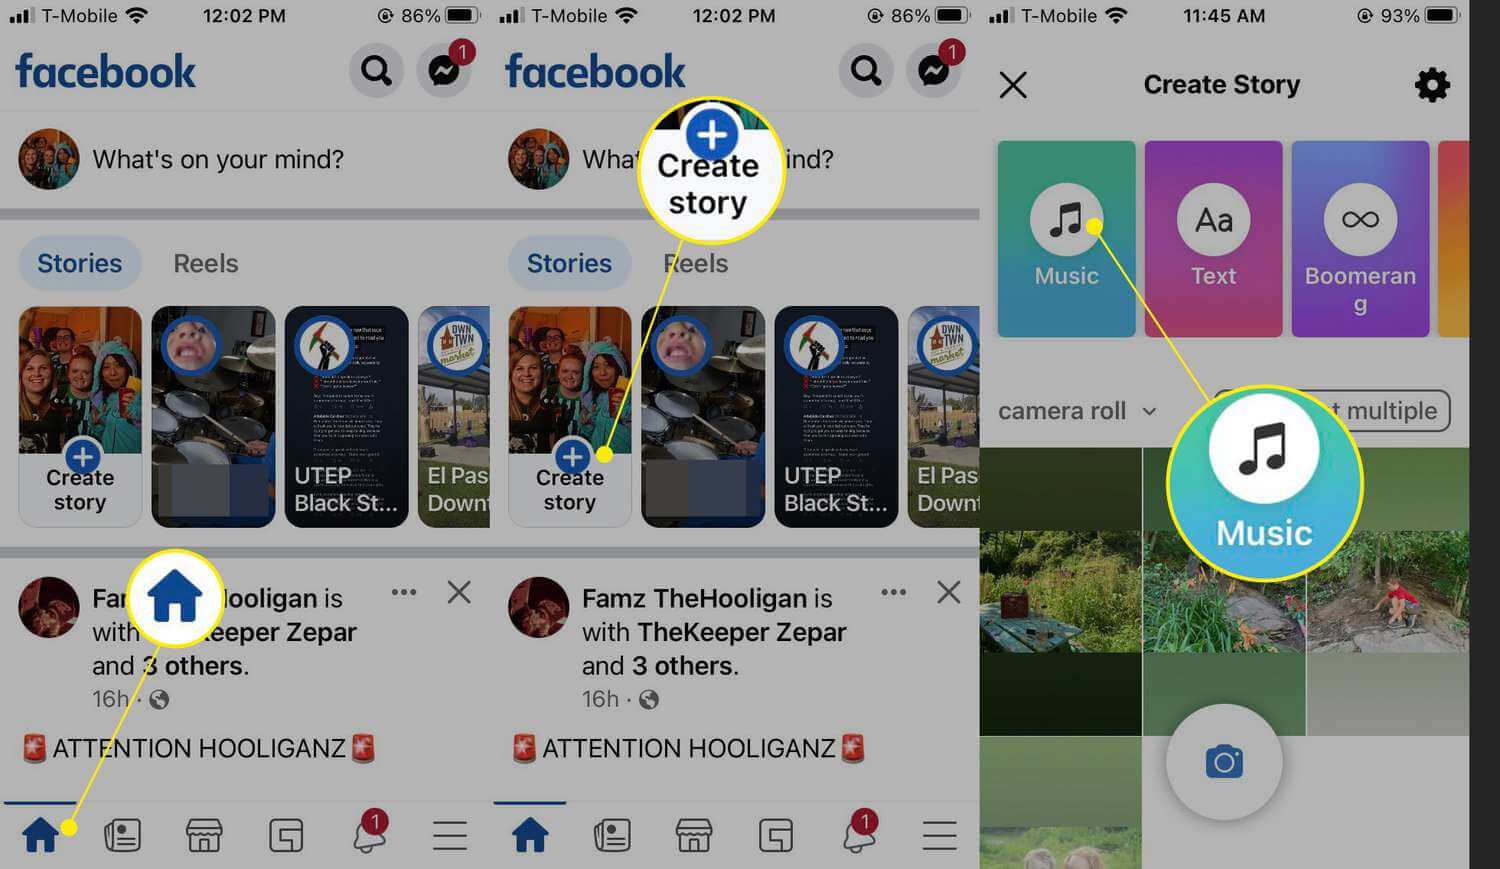 how to Add Music to Facebook Story